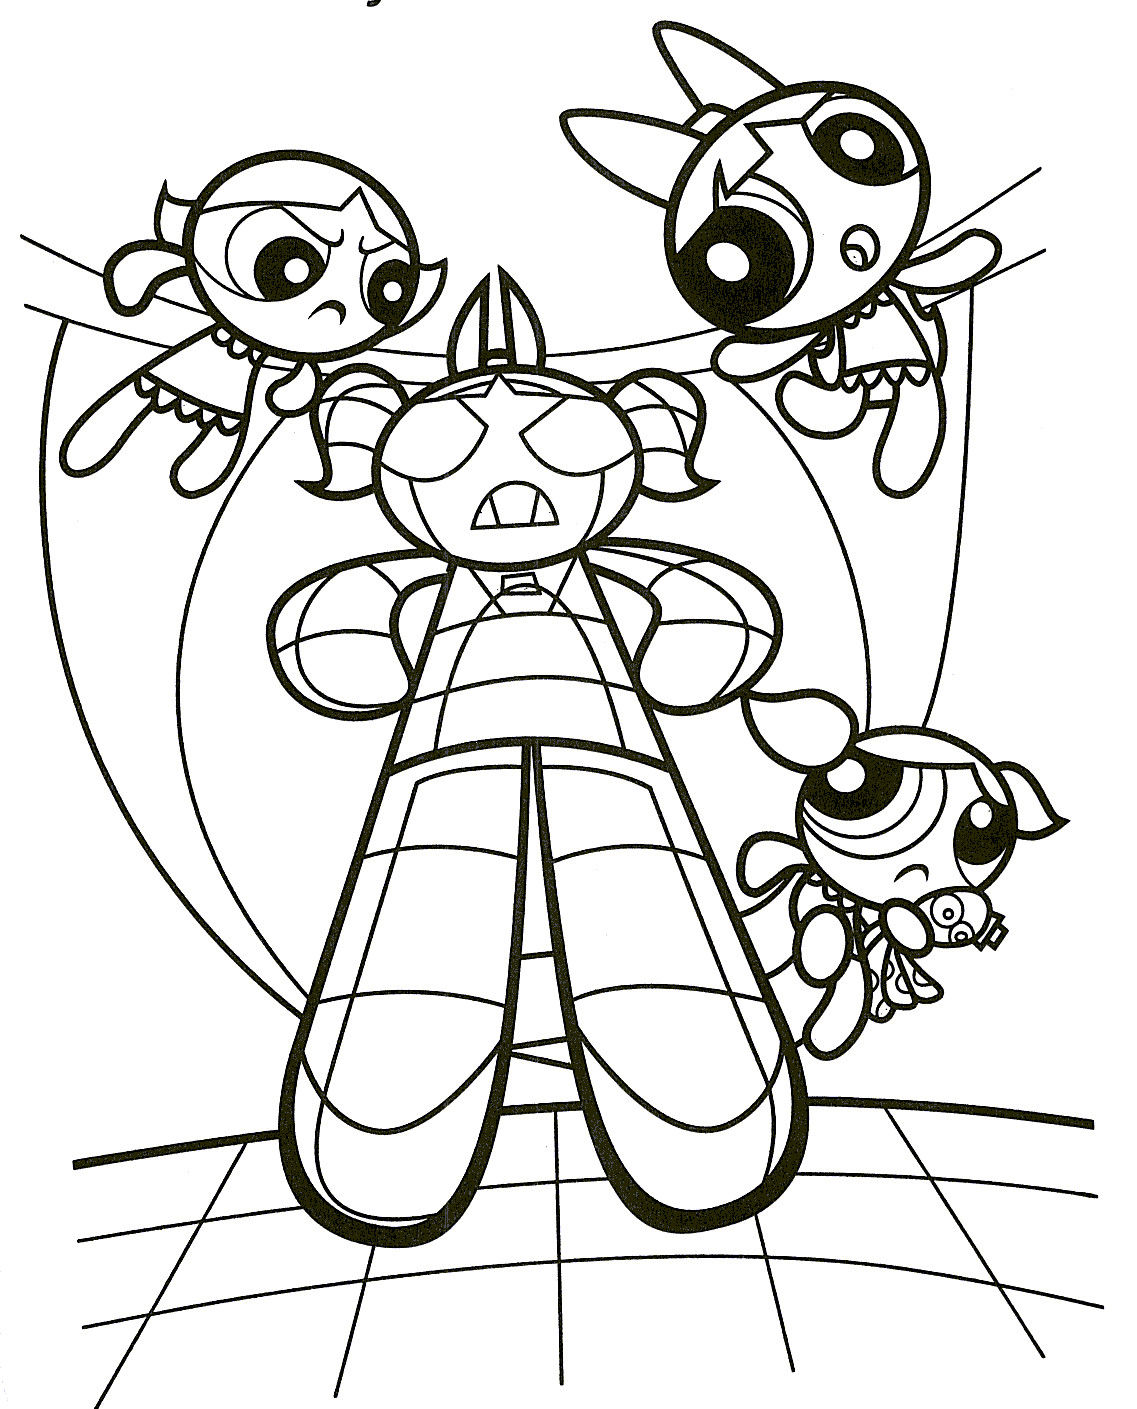 Coloring Pages Powerpuff Girls
 Powerpuff girls Coloring Pages